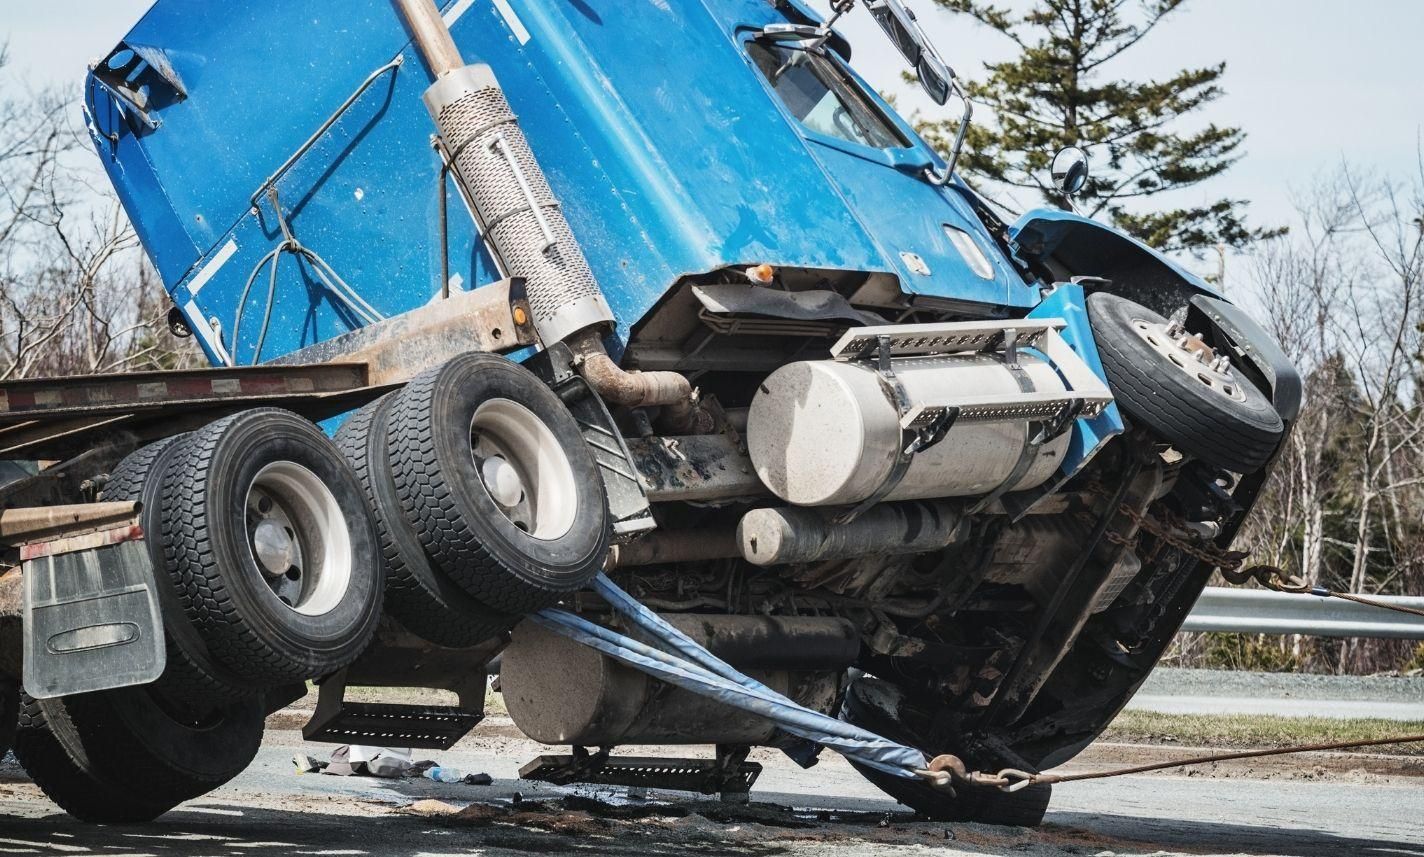 montrose-commercial-truck-accident-injury-lawyer